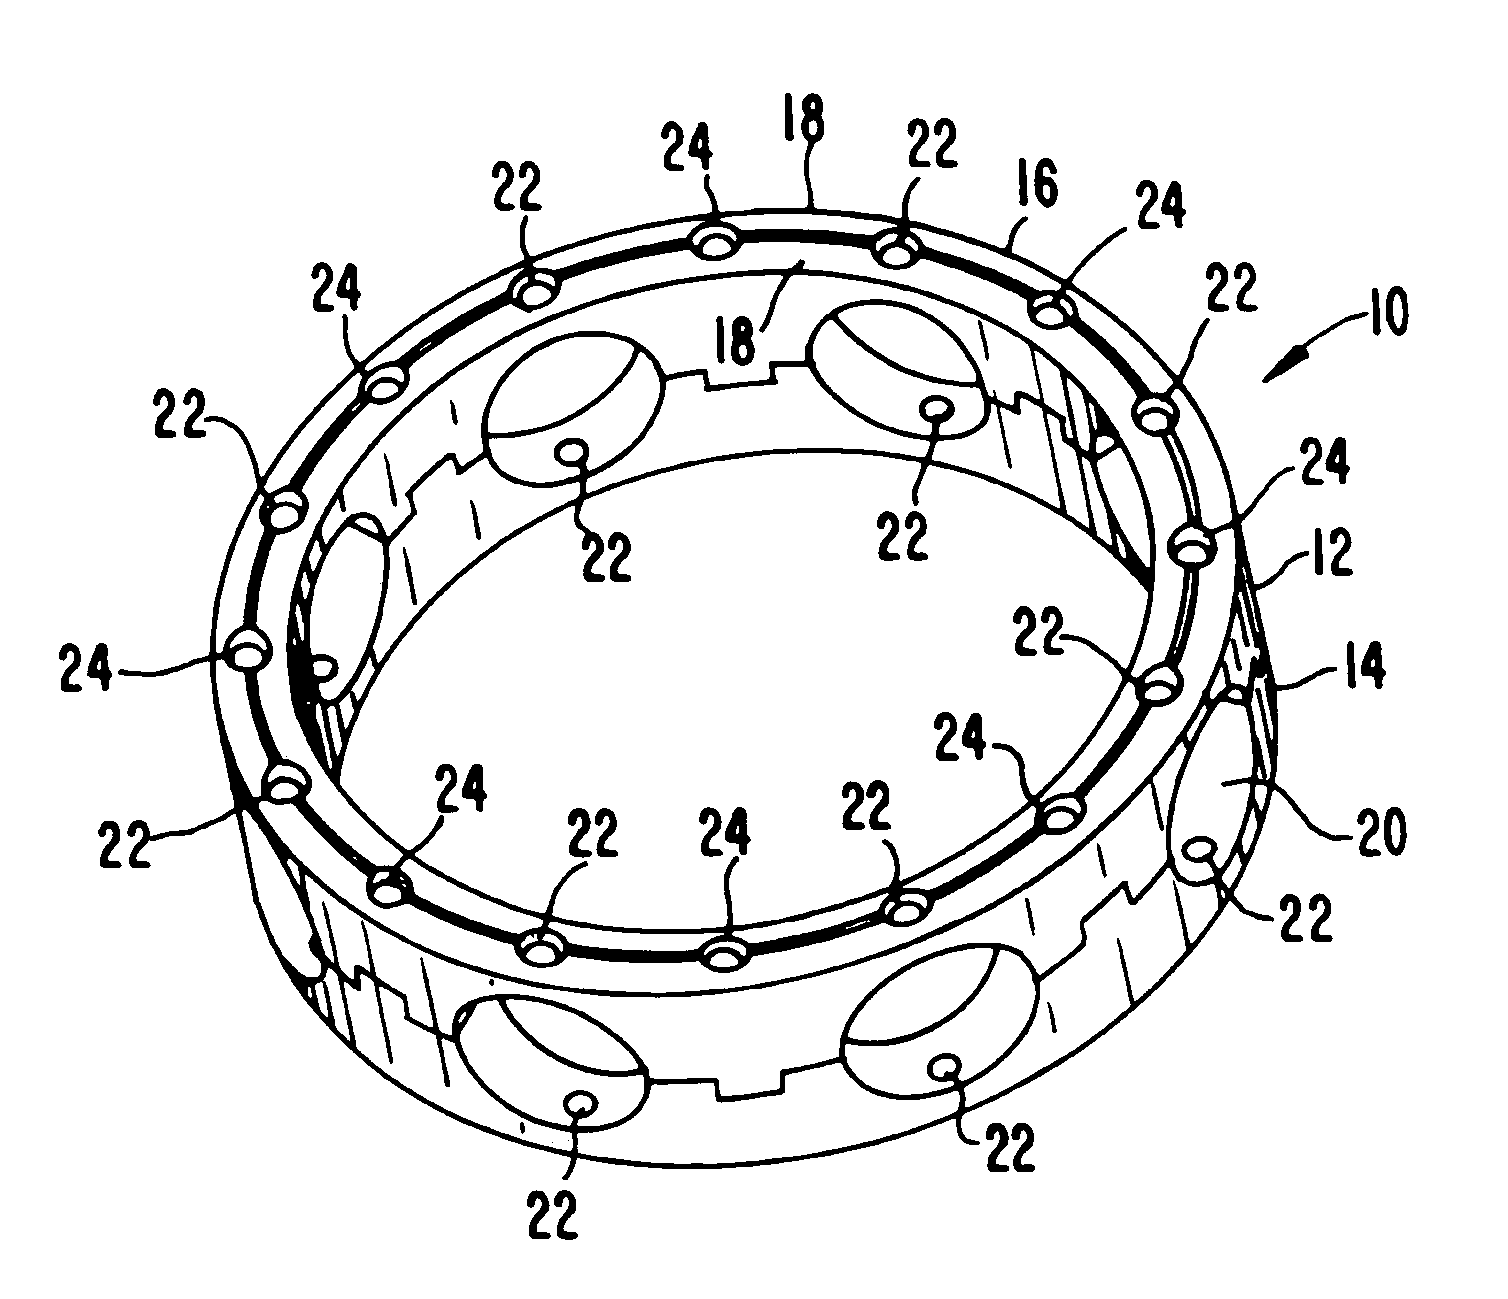 Bearing retainer assembly and method